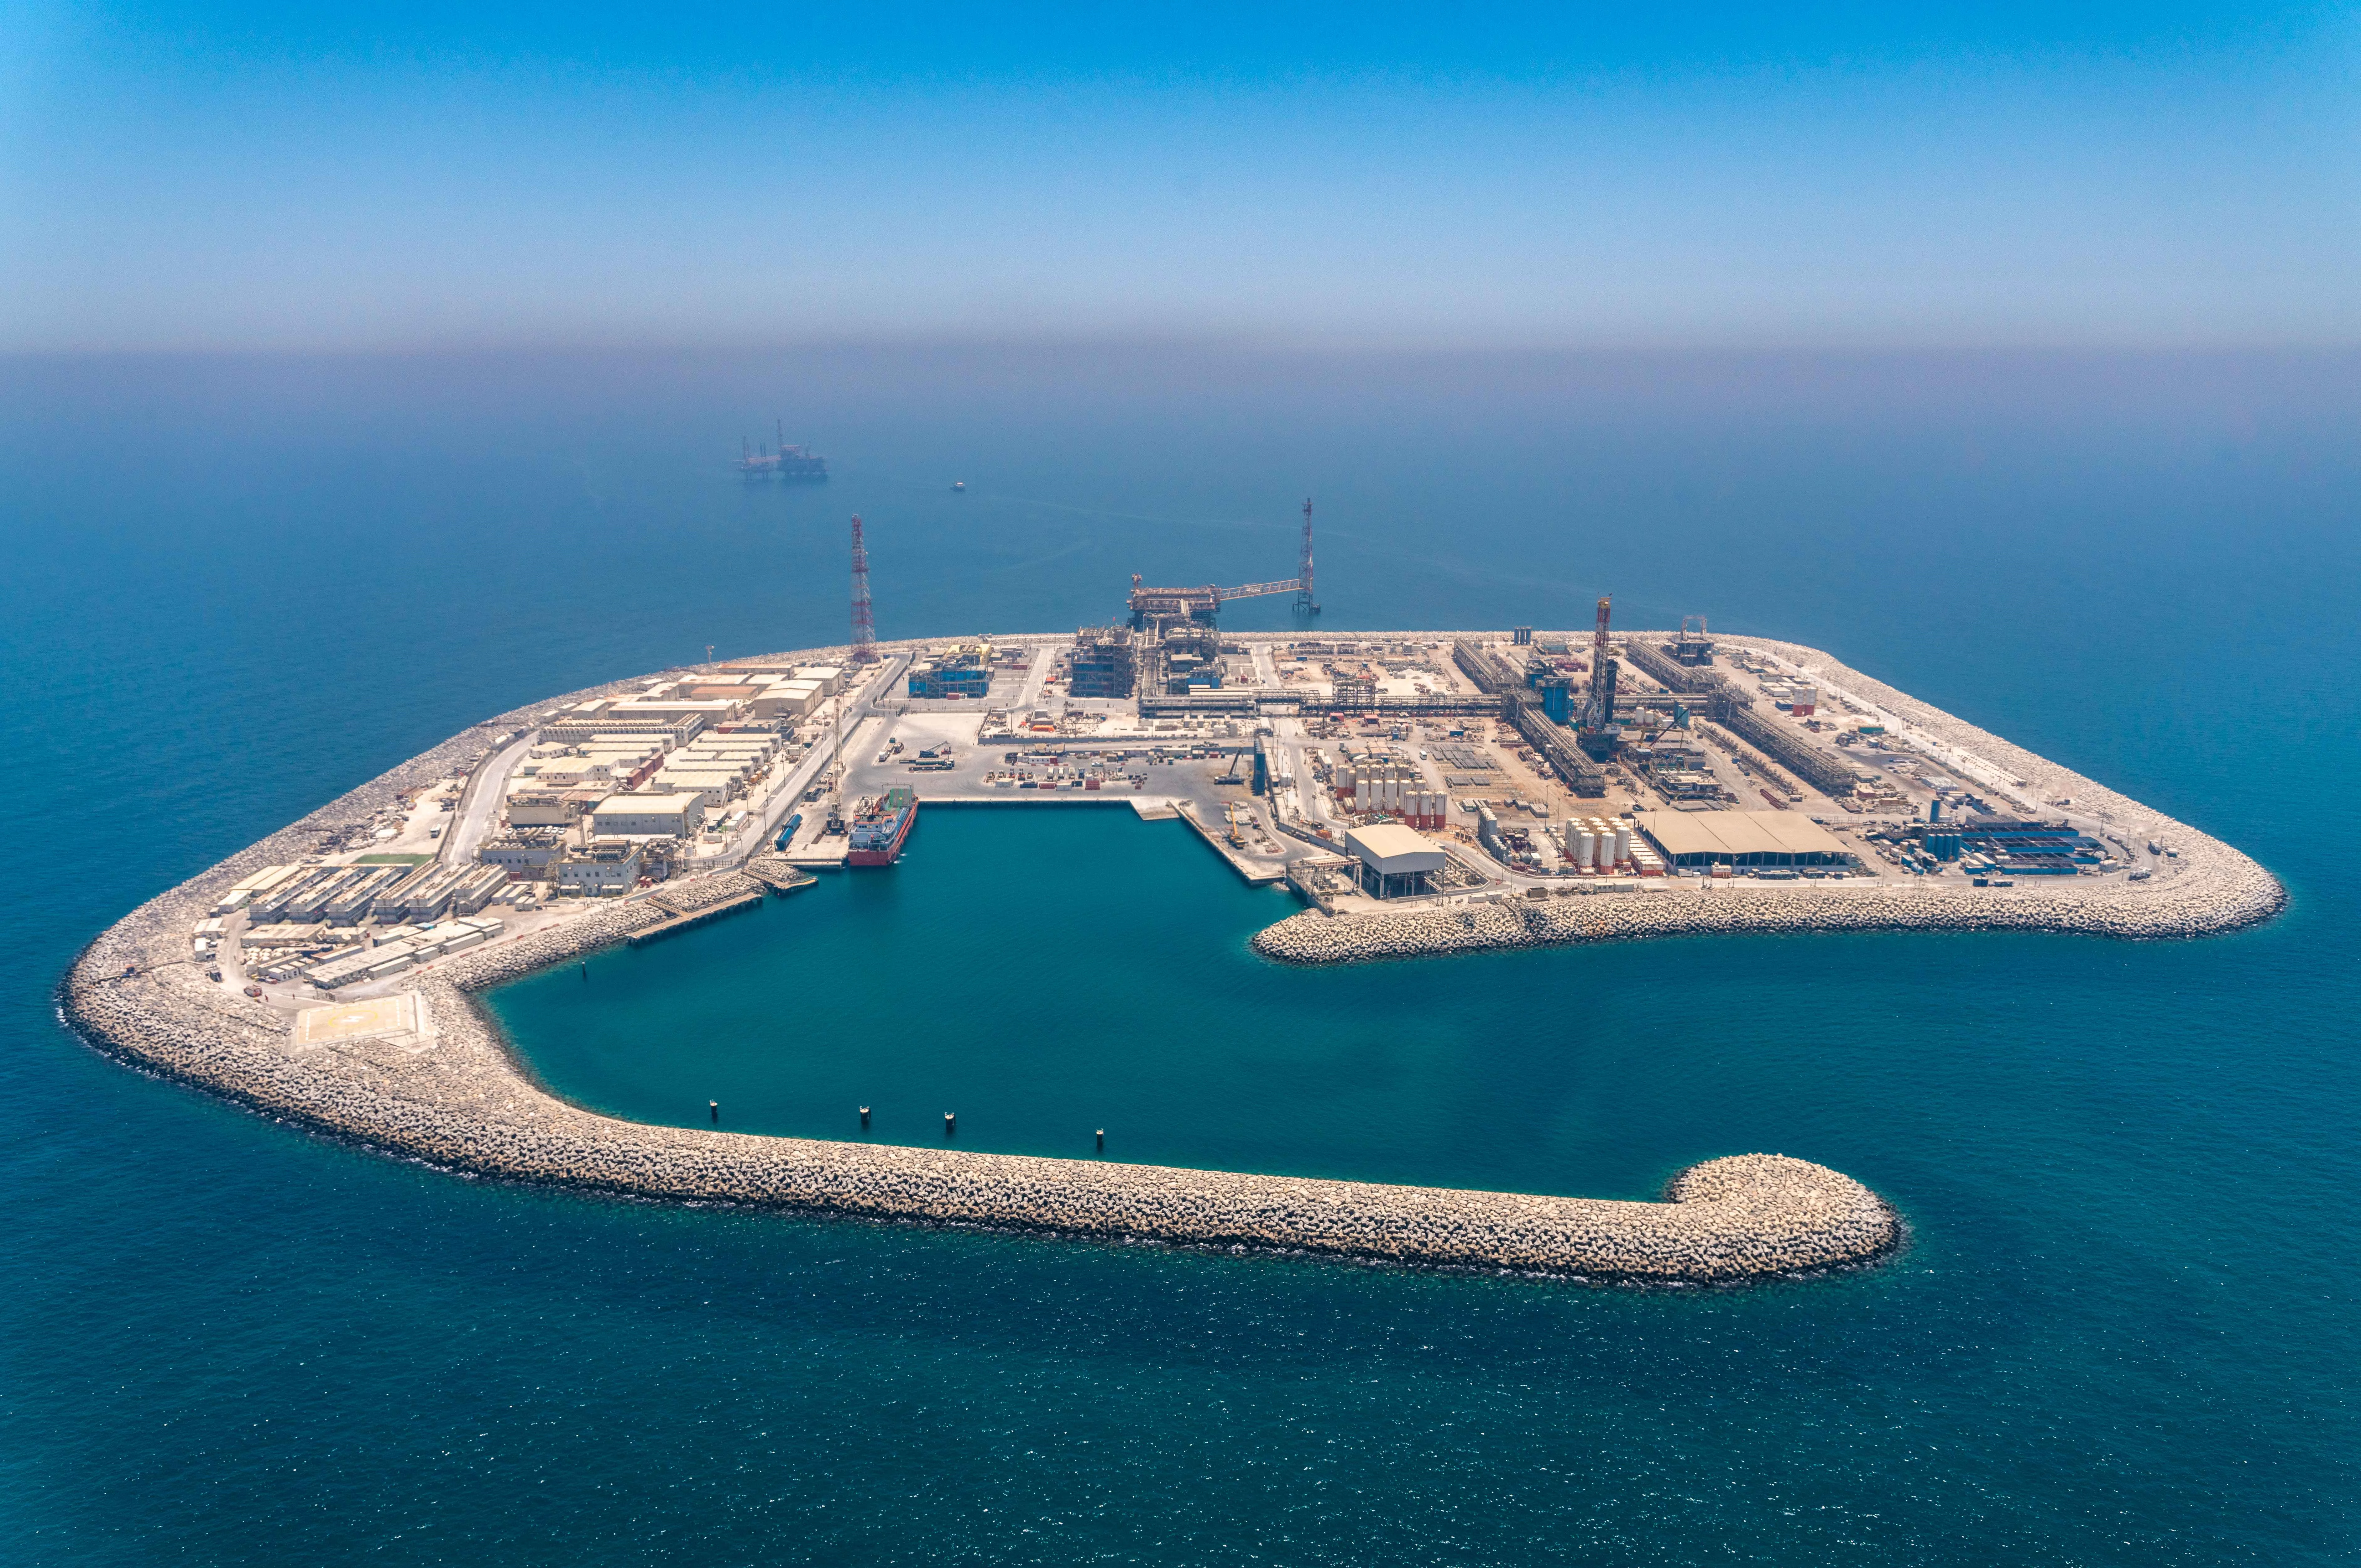 image is ADNOC Offshore Drilling Artificial Island 41